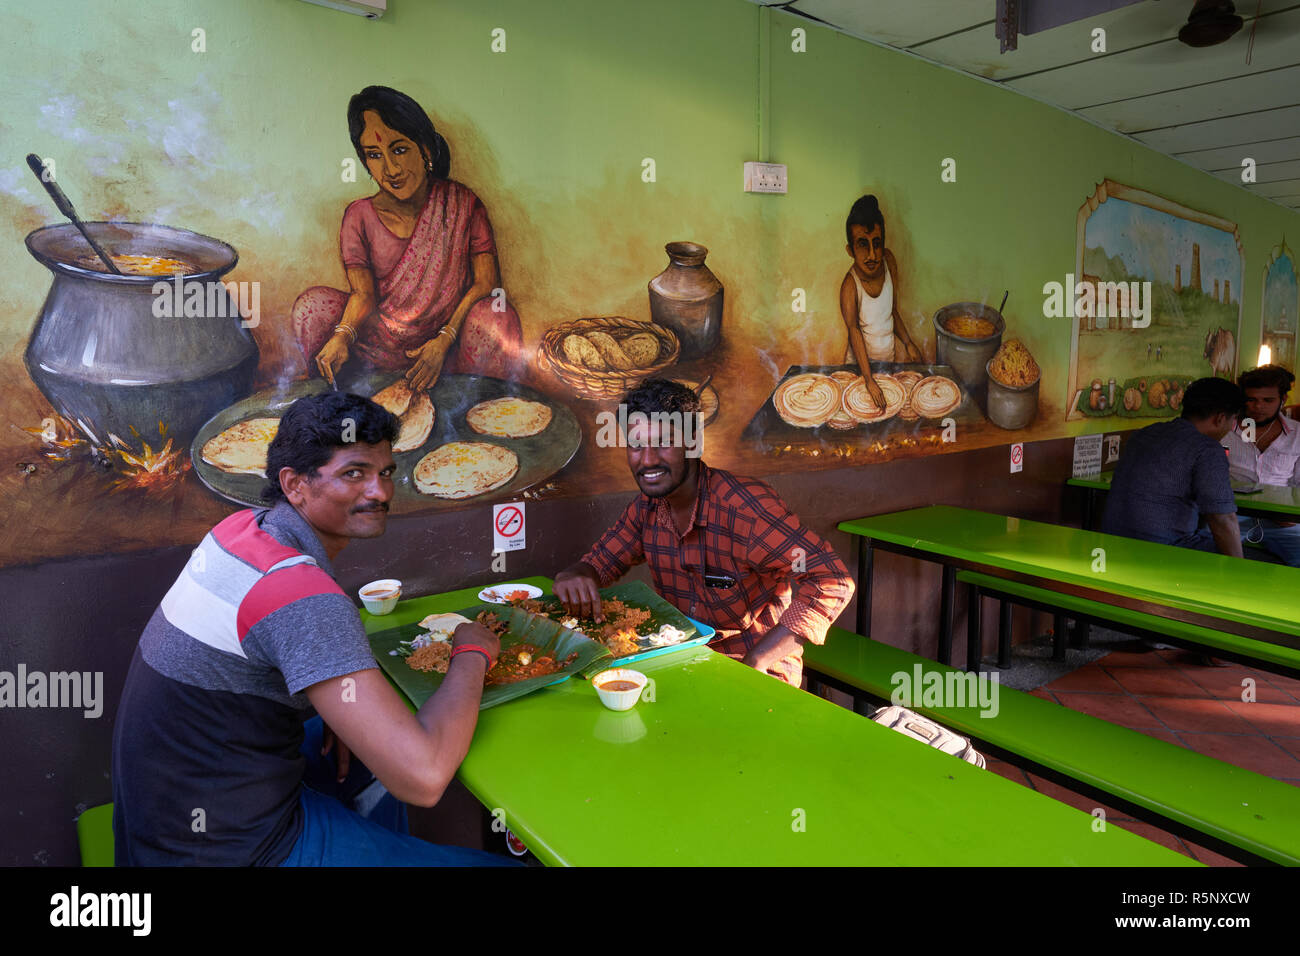 Two workers from Tamil Nadu, India, at an inexpensive, traditional South Indian restaurant in the Little India area of Singapore Stock Photo